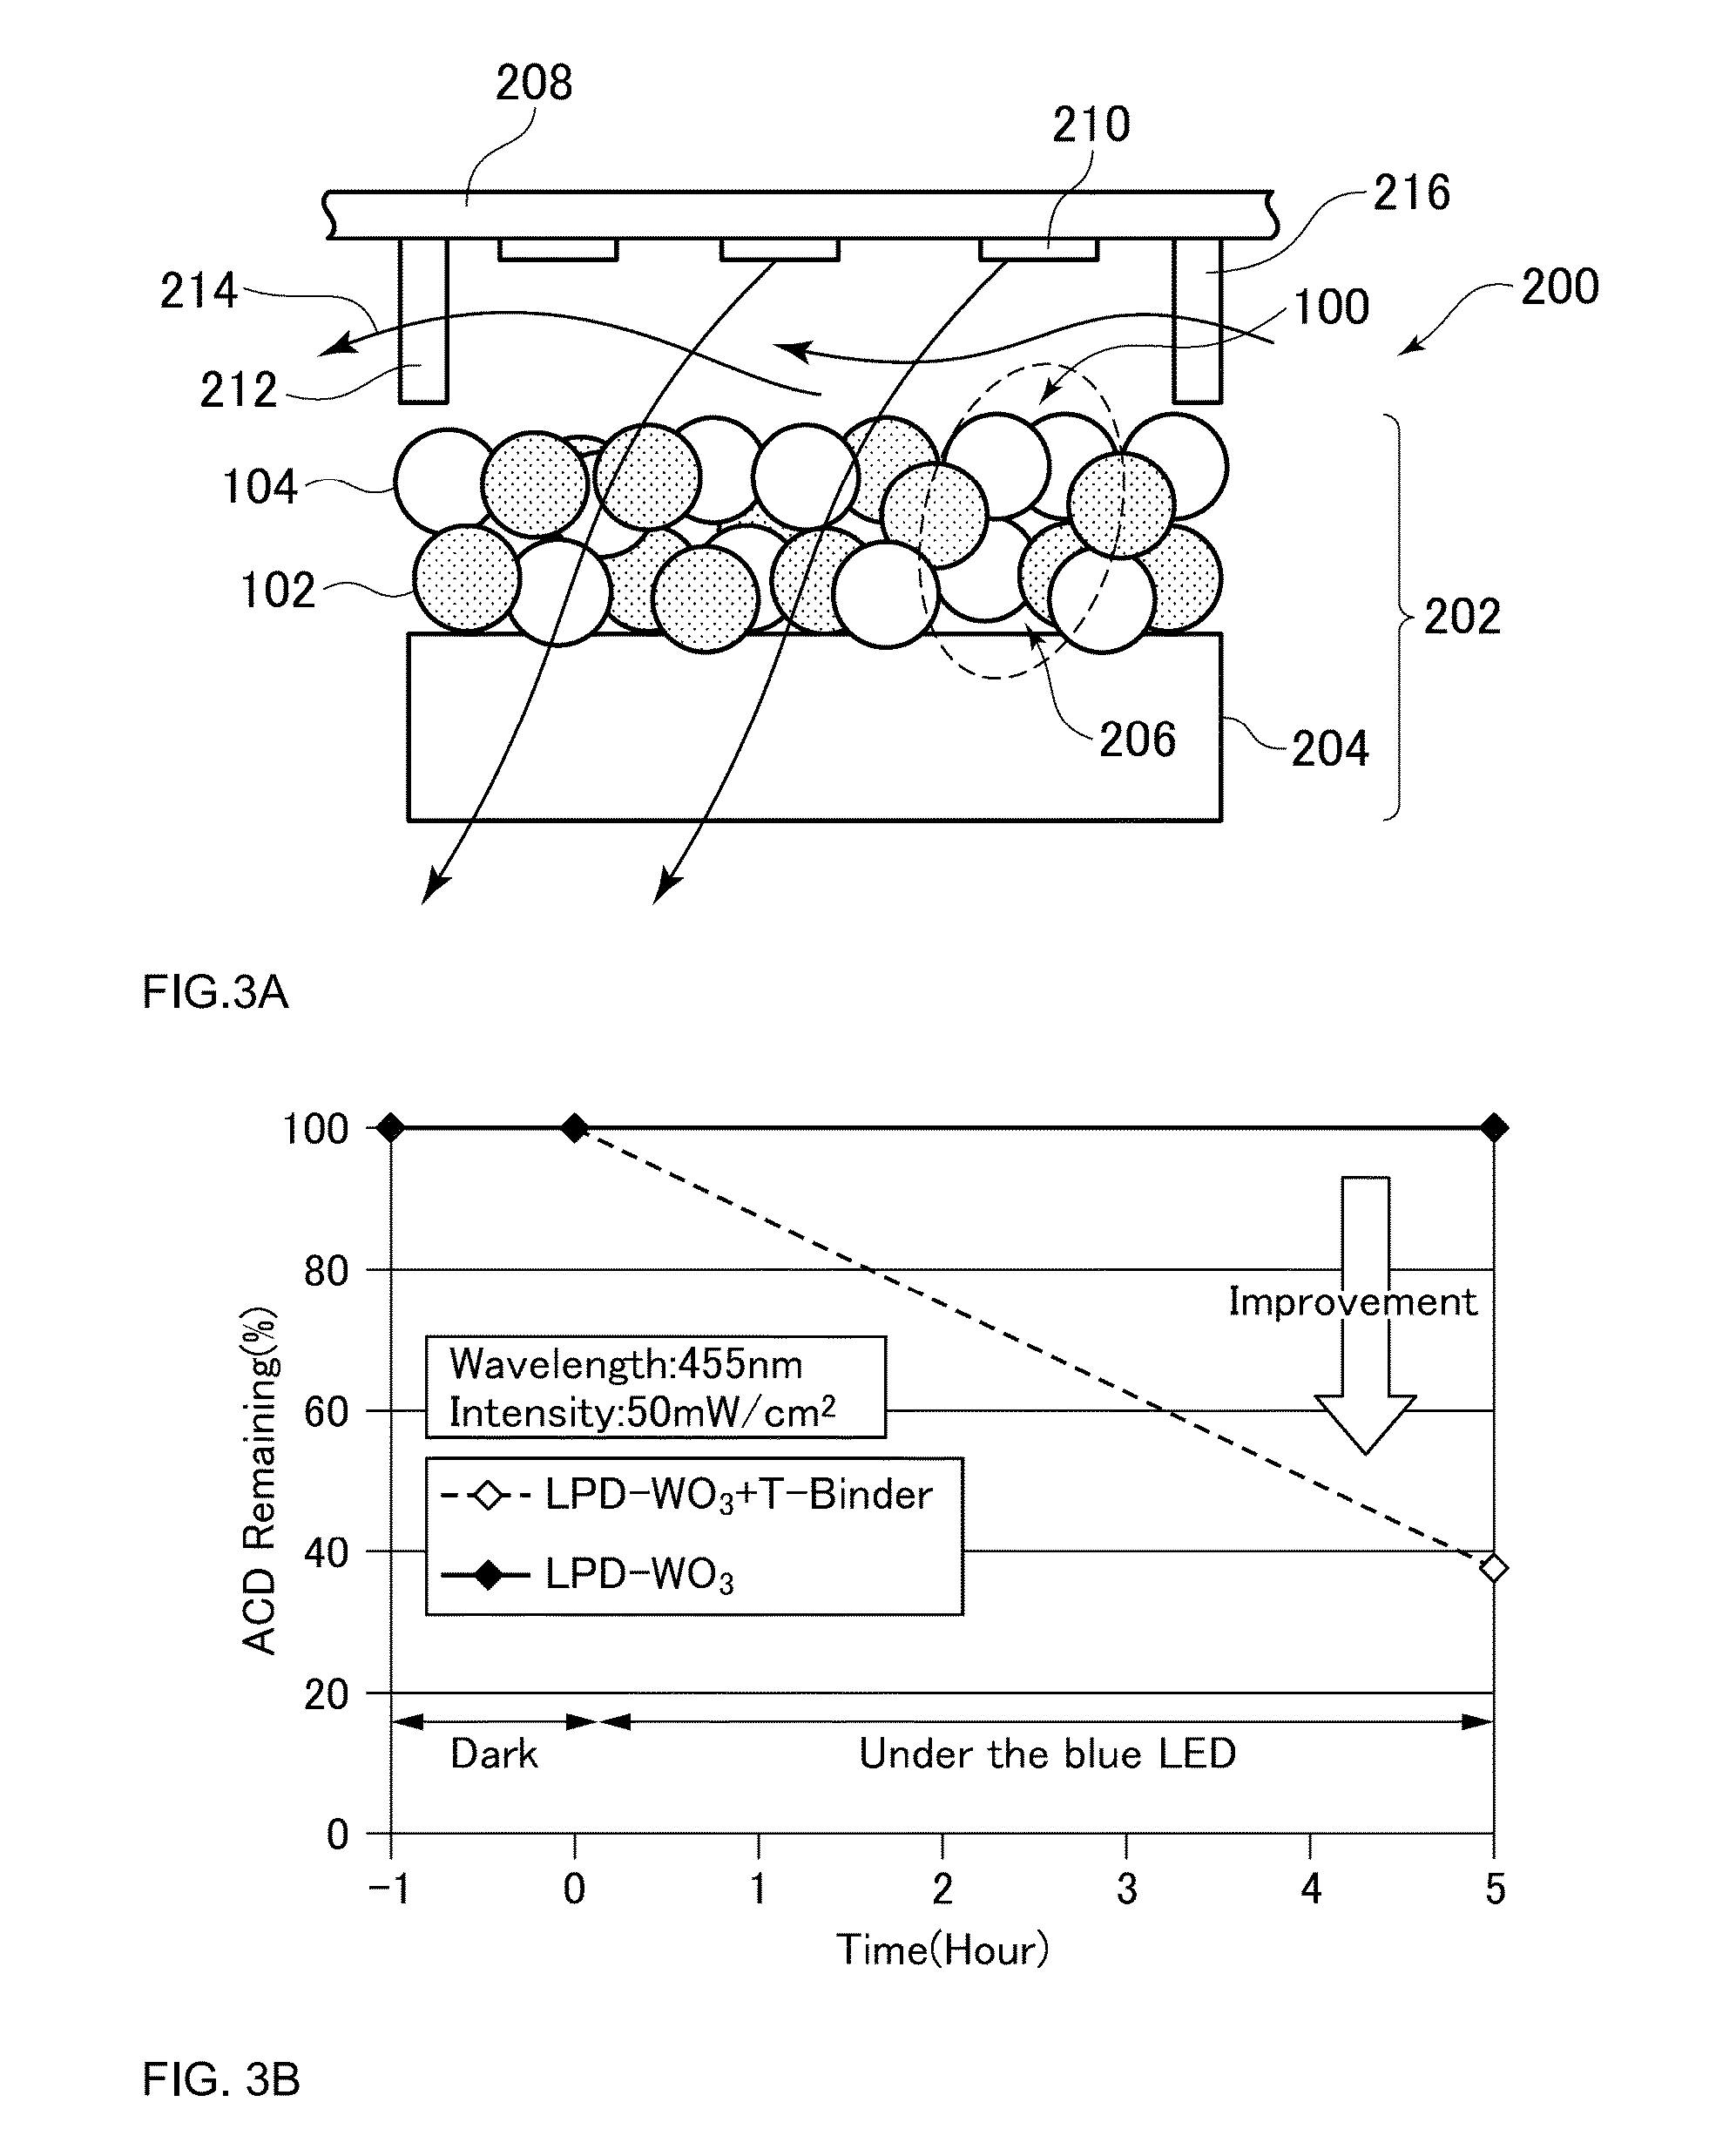 Filter Element for Decomposing Contaminants, System for Decomposing Contaminants and Method Using the System